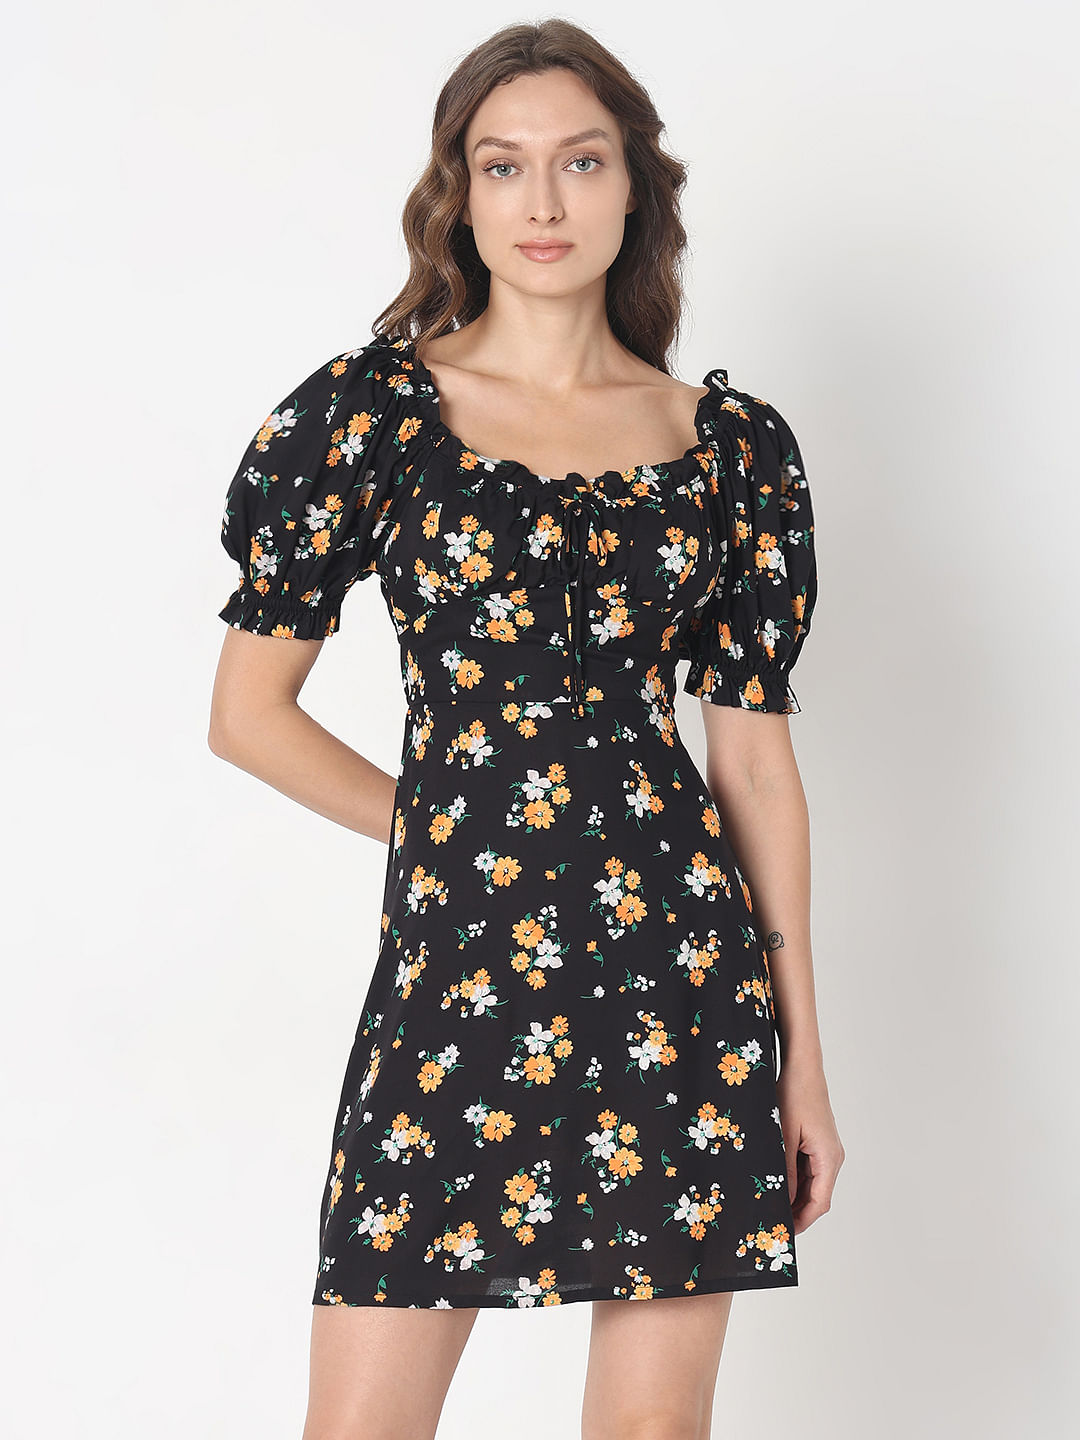 WornOnTV: Anna Kendrick's black floral print dress on The Kelly Clarkson  Show | Clothes and Wardrobe from TV